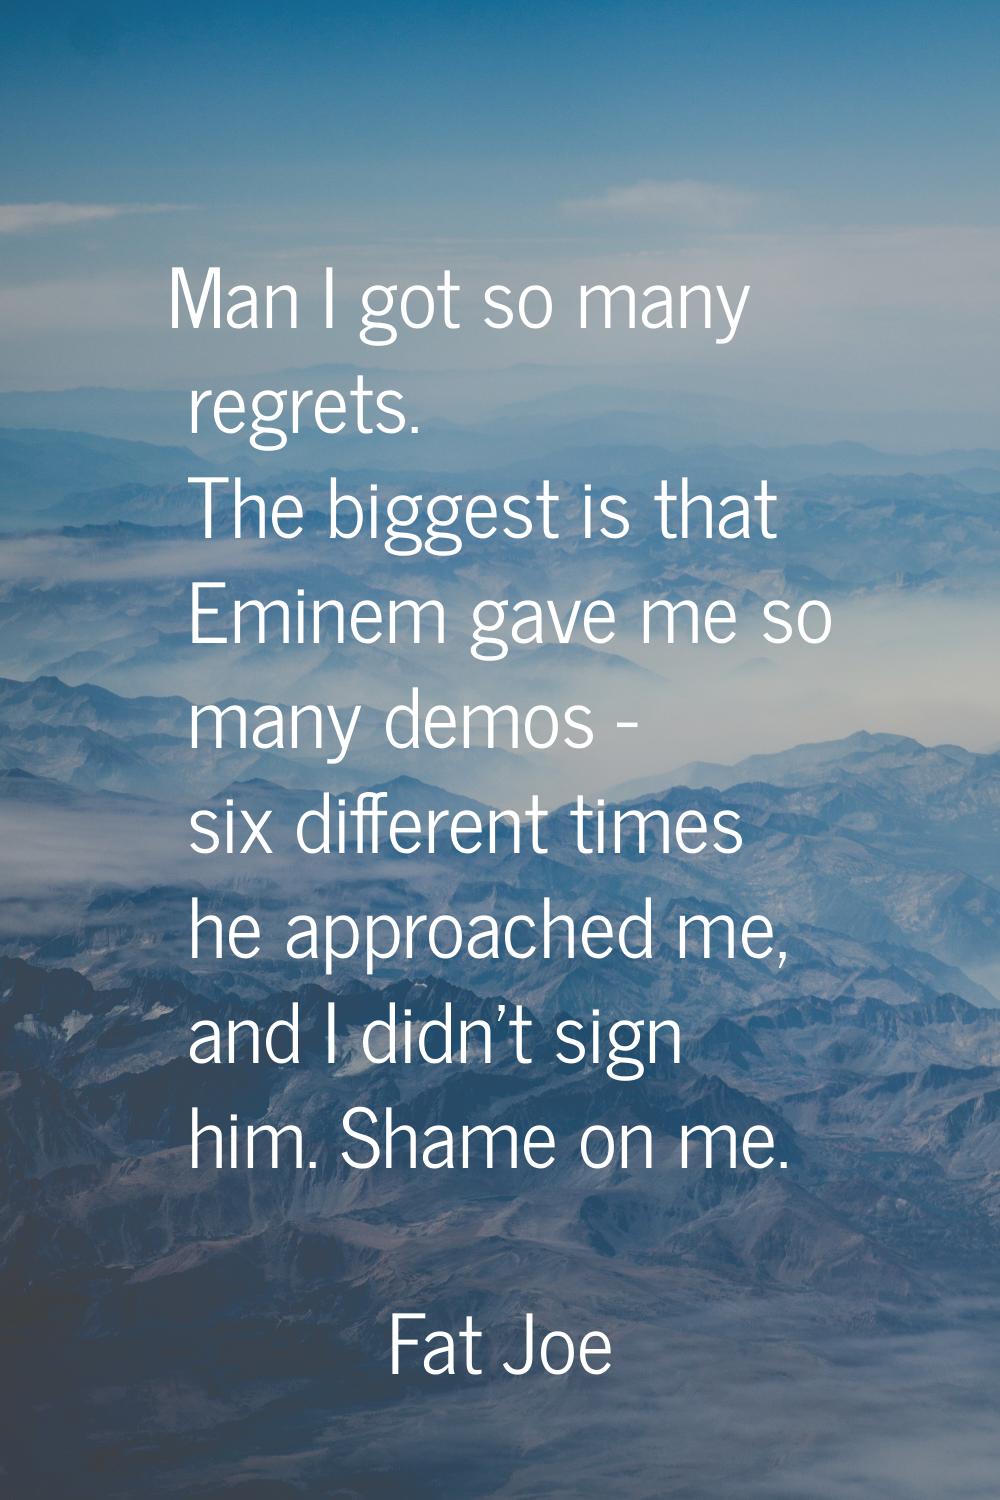 Man I got so many regrets. The biggest is that Eminem gave me so many demos - six different times h